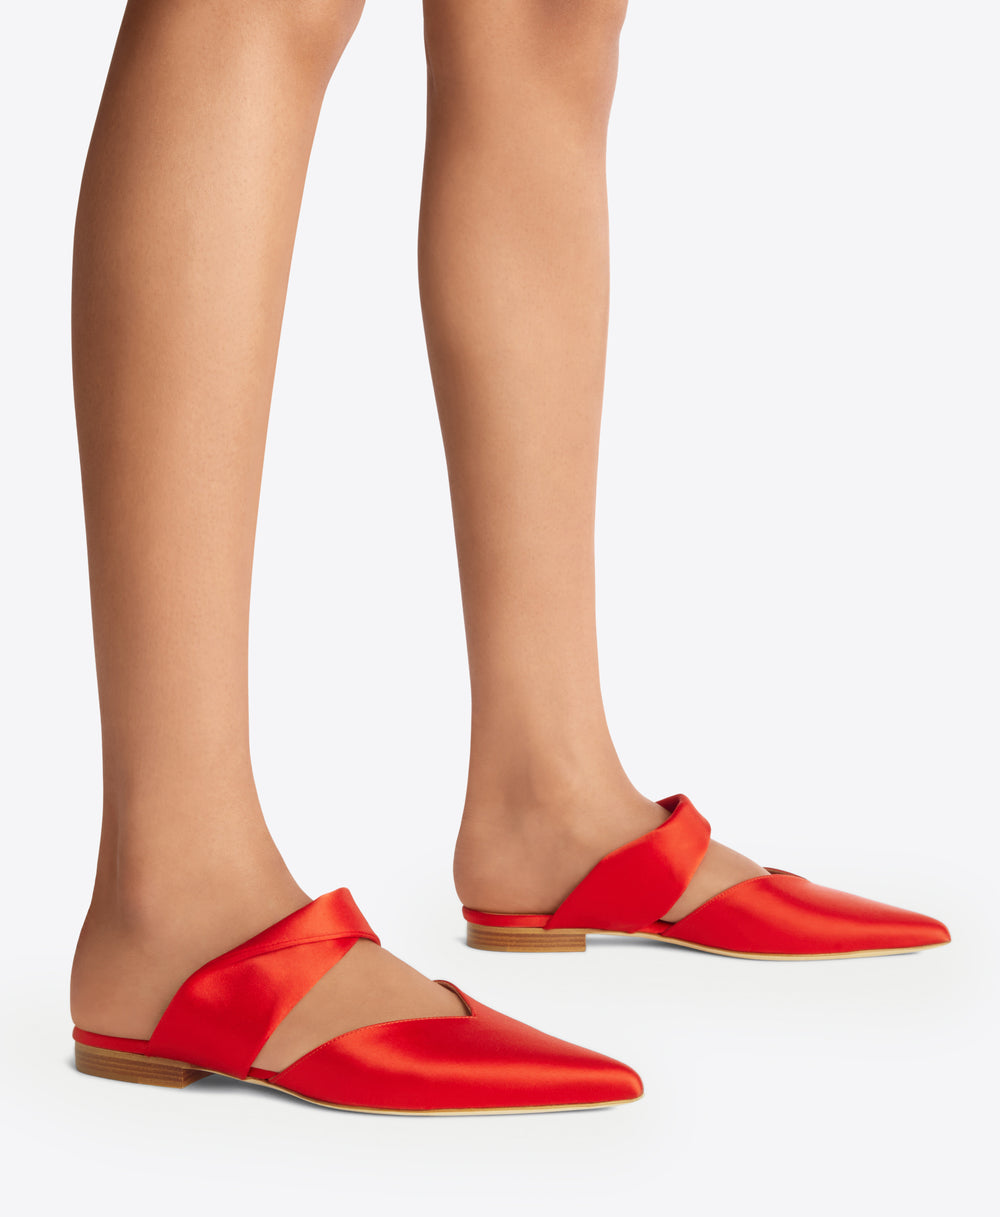 Malone Souliers Maisie Red Satin Flat Mules